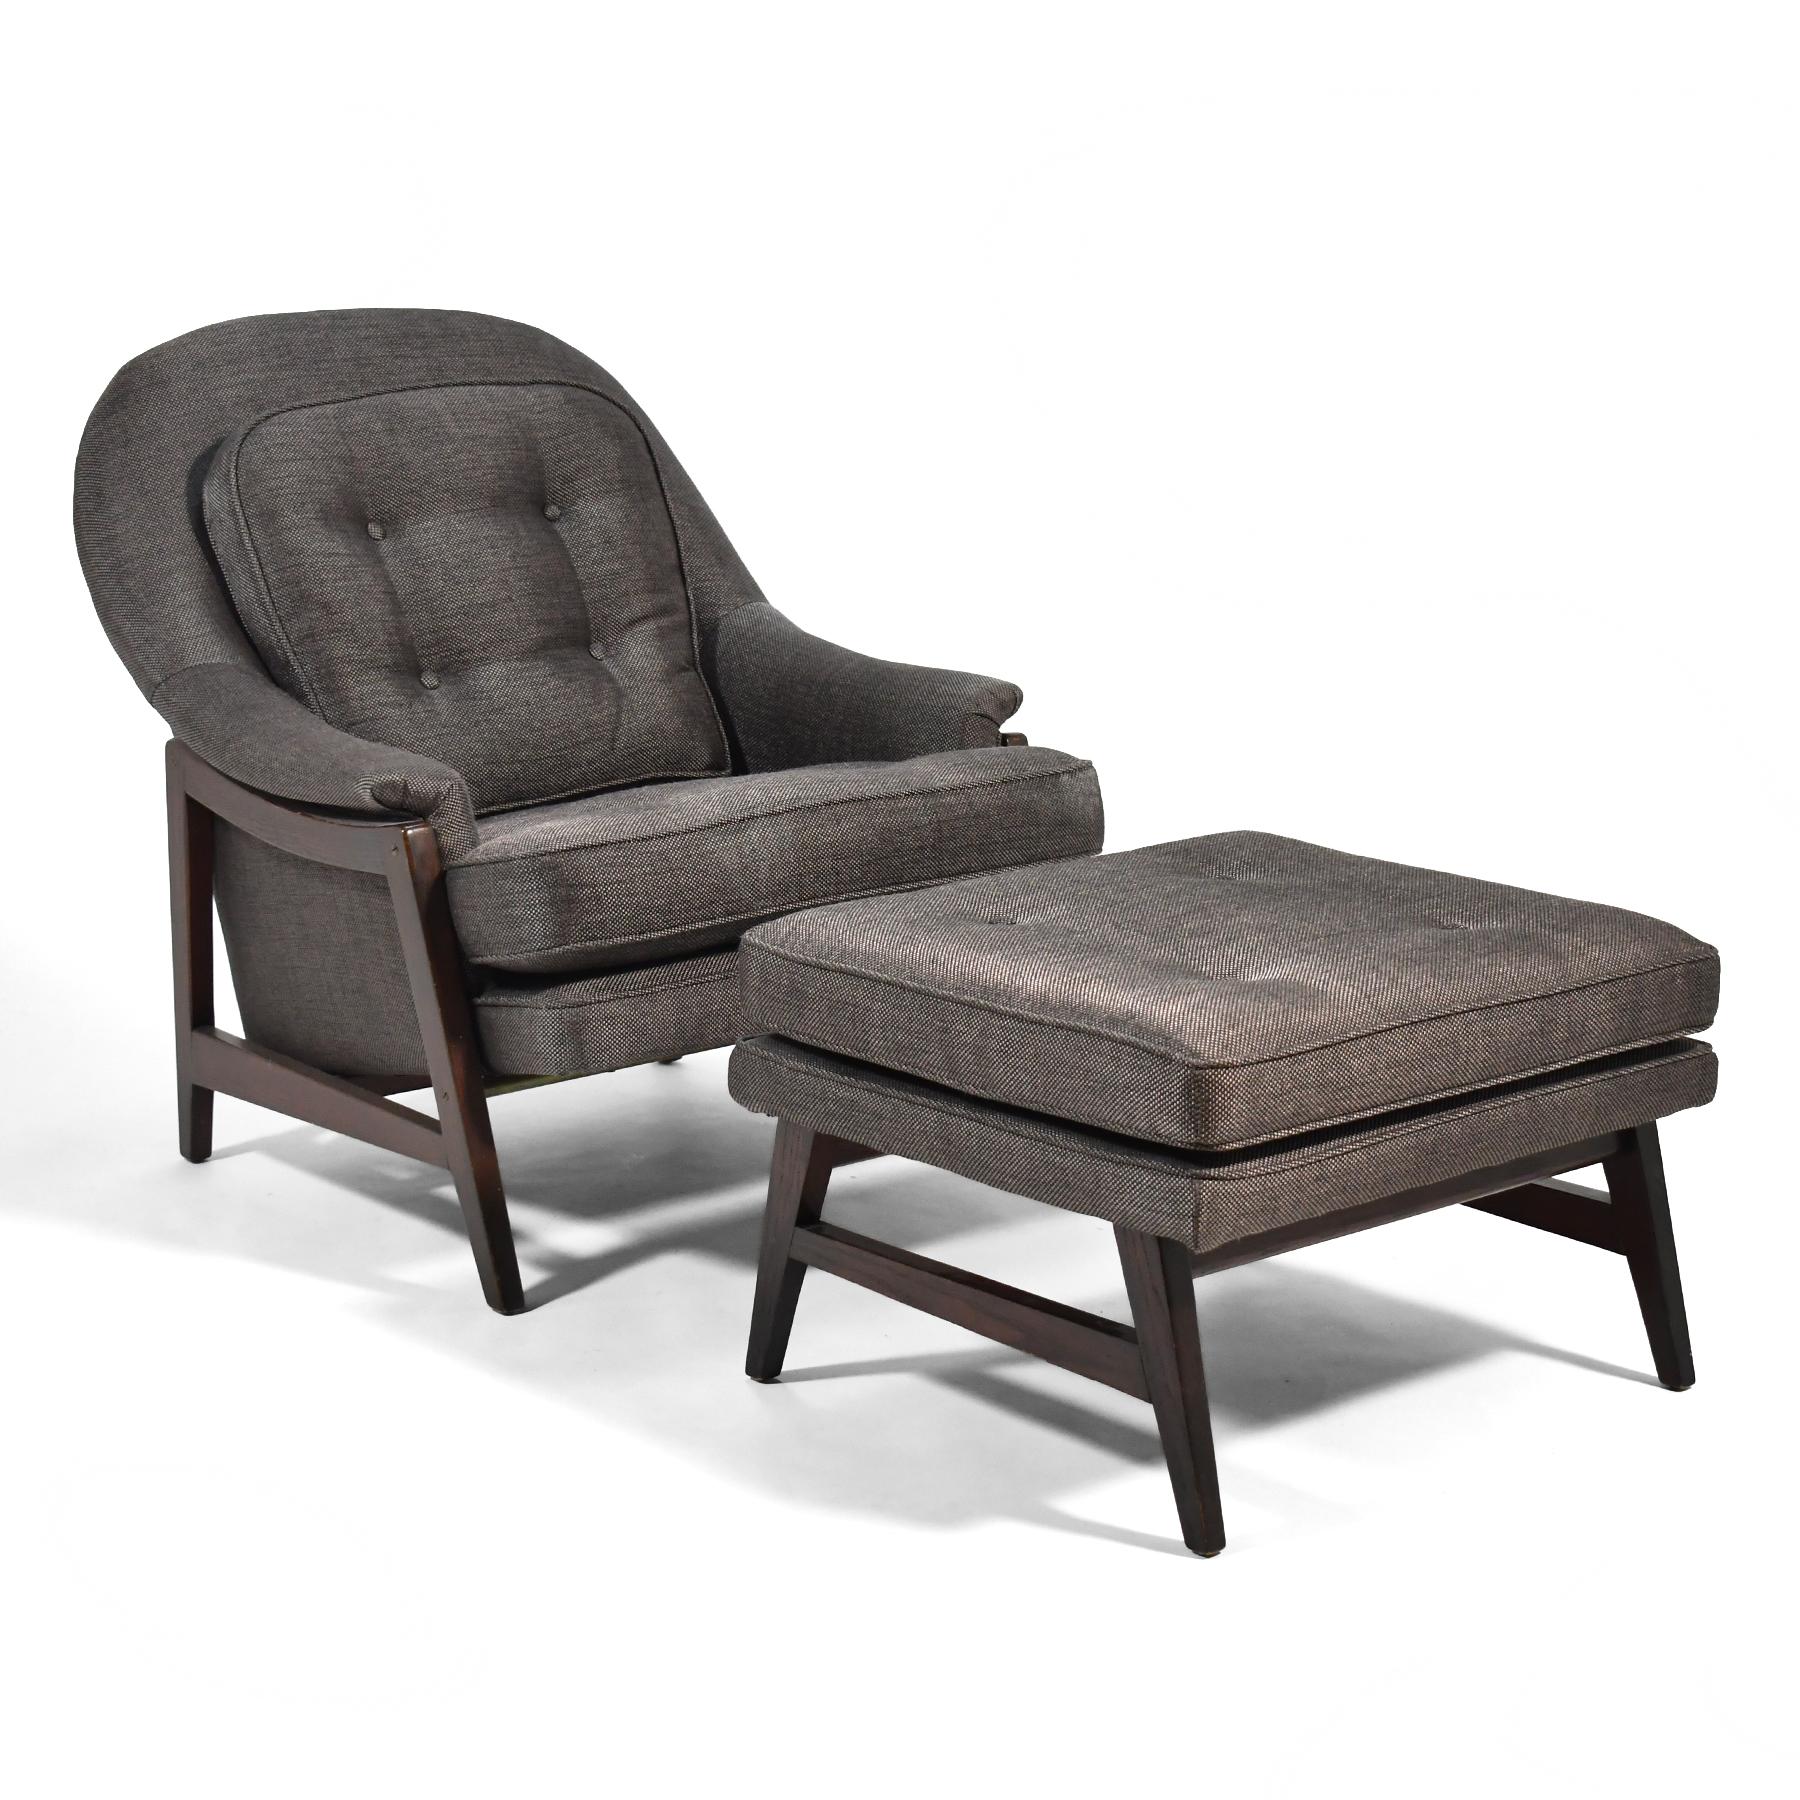 This spectacular design by Ed Wormley from his Janus collection for Dunbar, the model 5701 lounge chair and ottoman is a generous chair with a relaxing, deep seat and sumptuous cushion. With the addition of the foot rest, the chair is perfect for